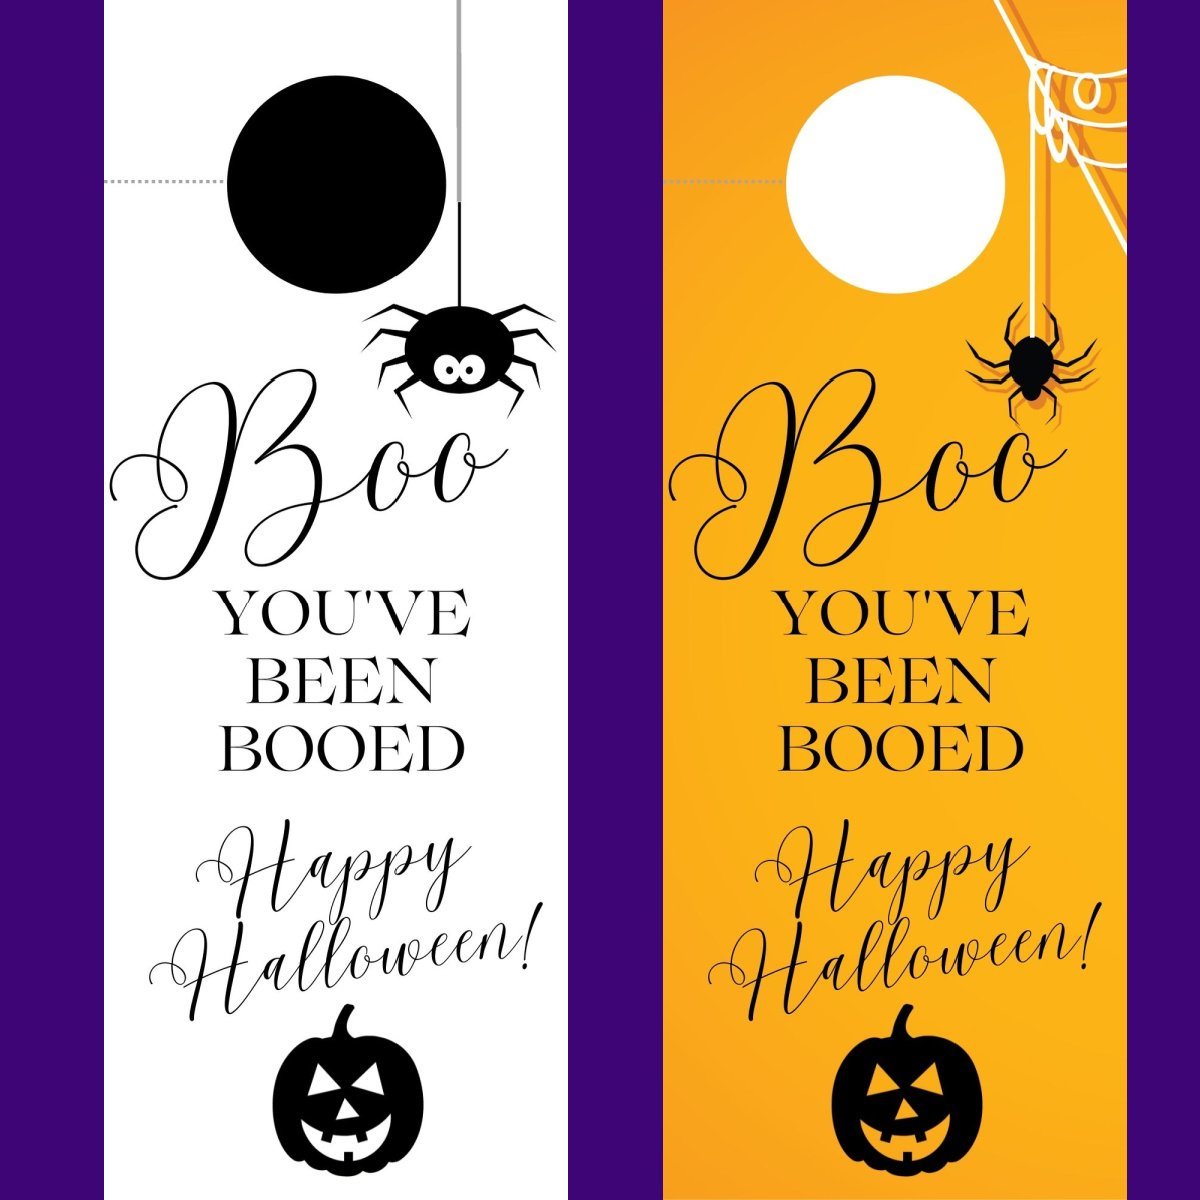 Boo! 450 FREE Halloween Printables - Coloring Pages, Tags, Labels